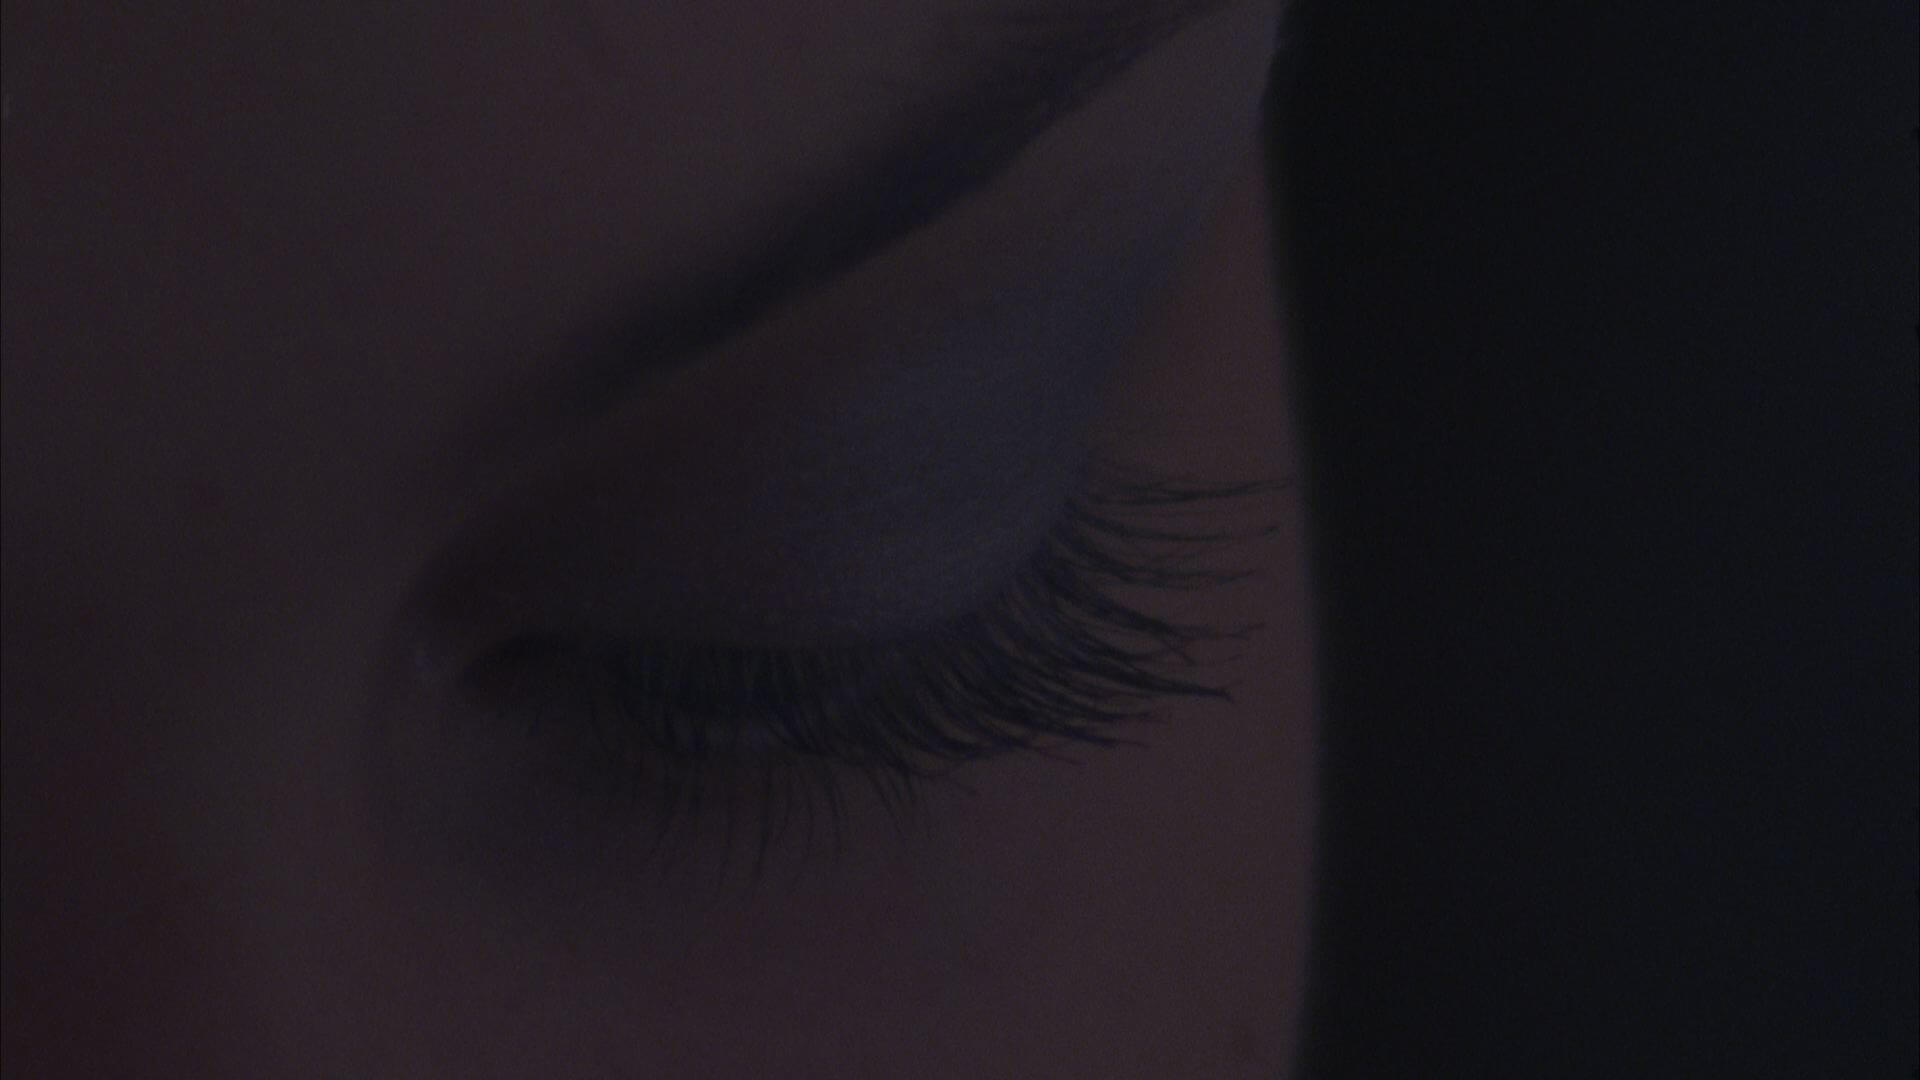 Still from The Vanquishing of the Witch Baba Yaga. Close-up to the eyelid of a person wearing eyeshadow and mascara.